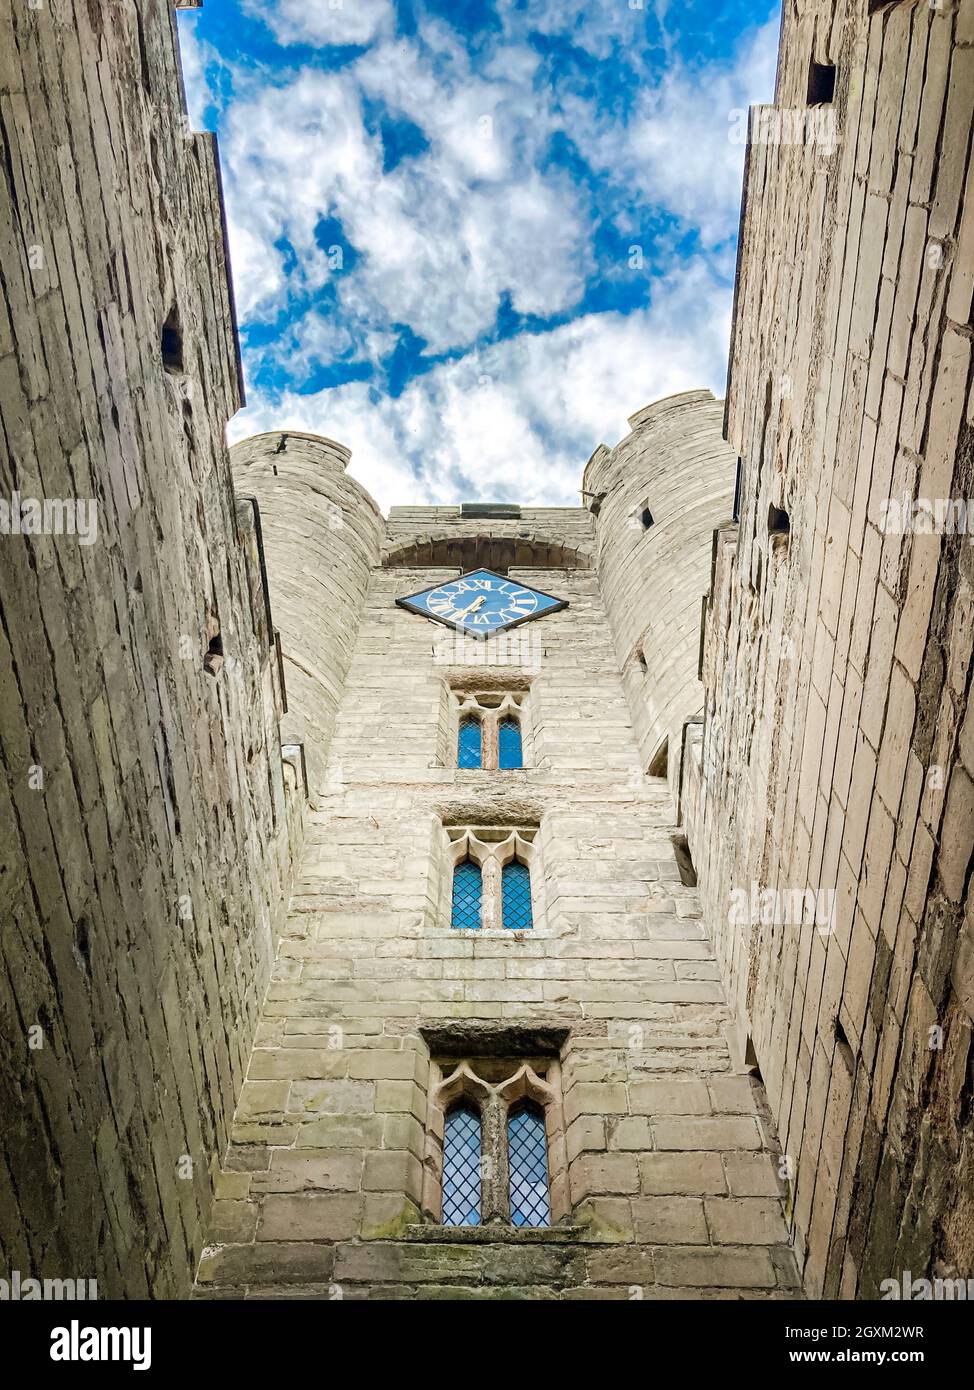 View of medieval Warwick Castle from below with the cloudy blue sky. View of rustic stone work walls, thin windows, a clock and keep tower turrets Stock Photo